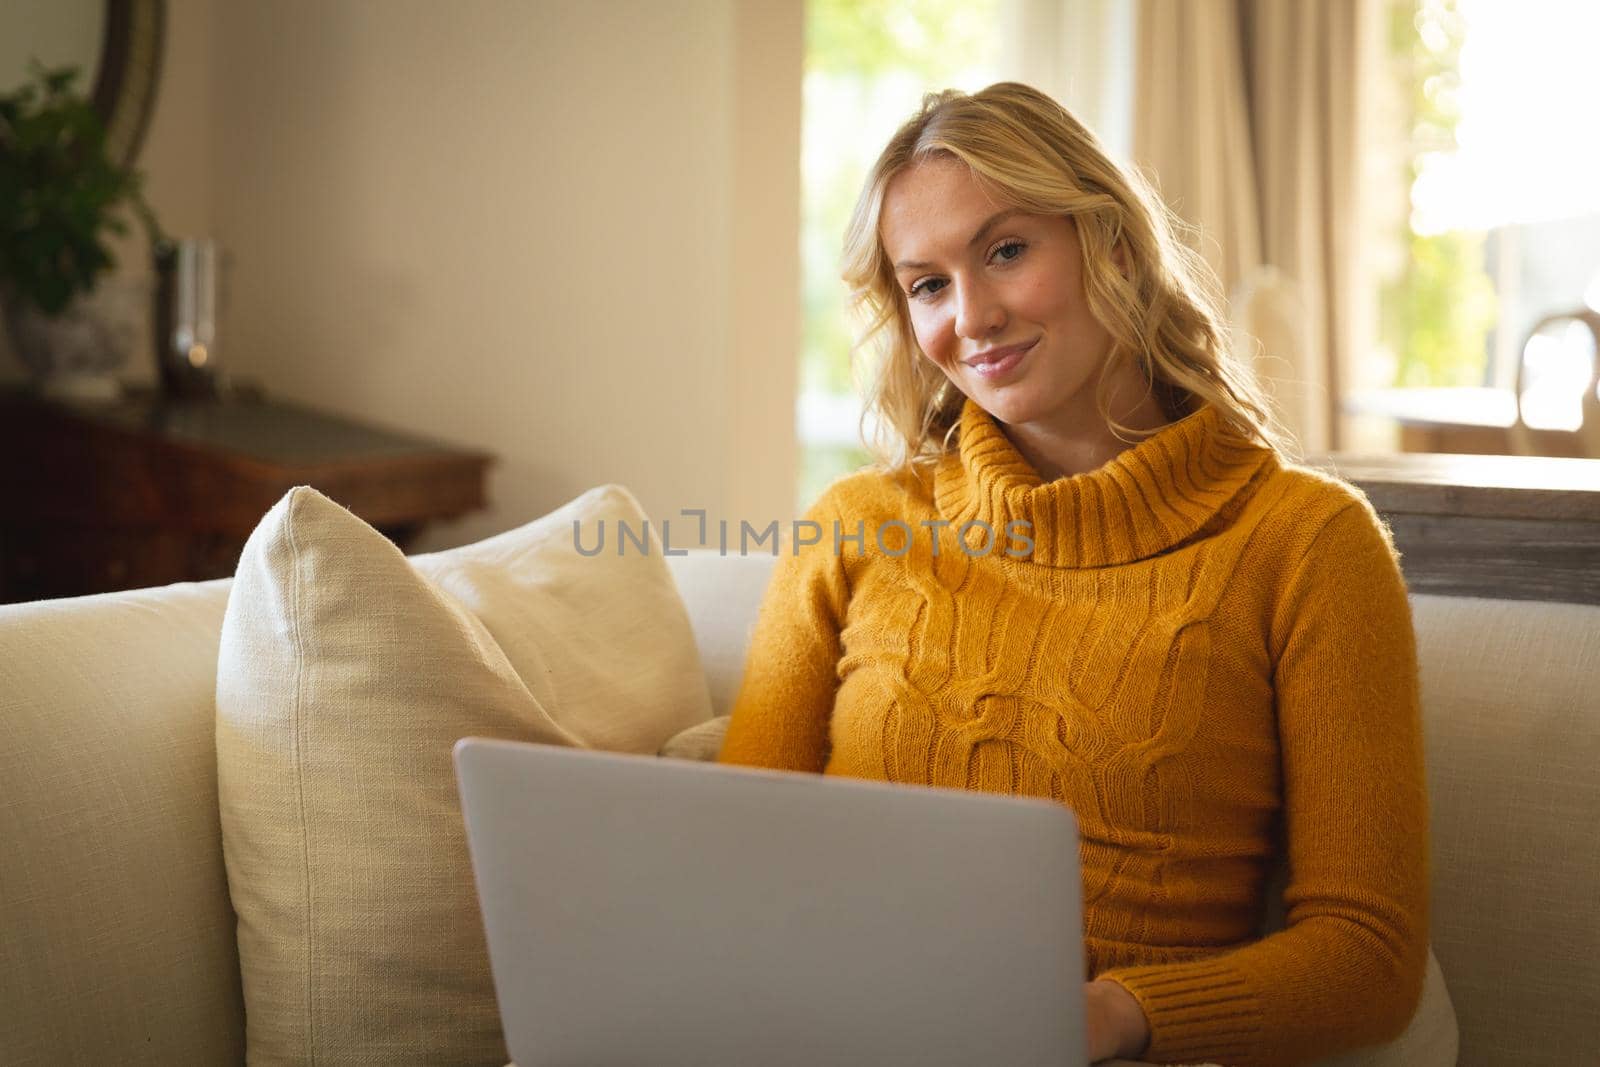 Portrait of happy caucasian woman sitting on couch in living room using laptop, smiling. spending free time at home with technology.